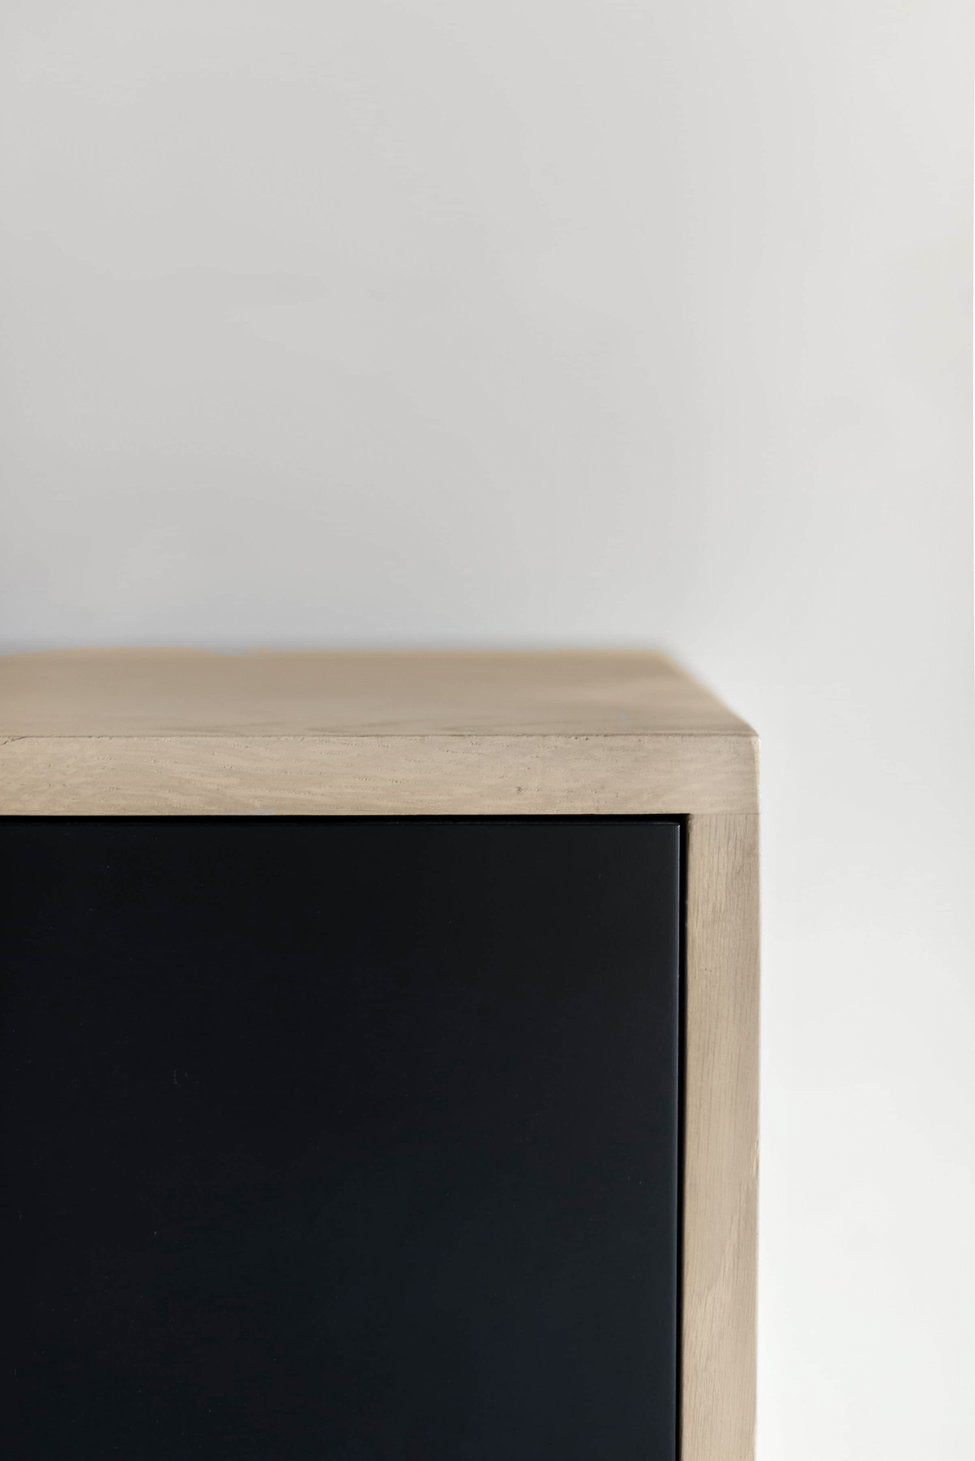 Mossam credenza - wood and leather cabinet 